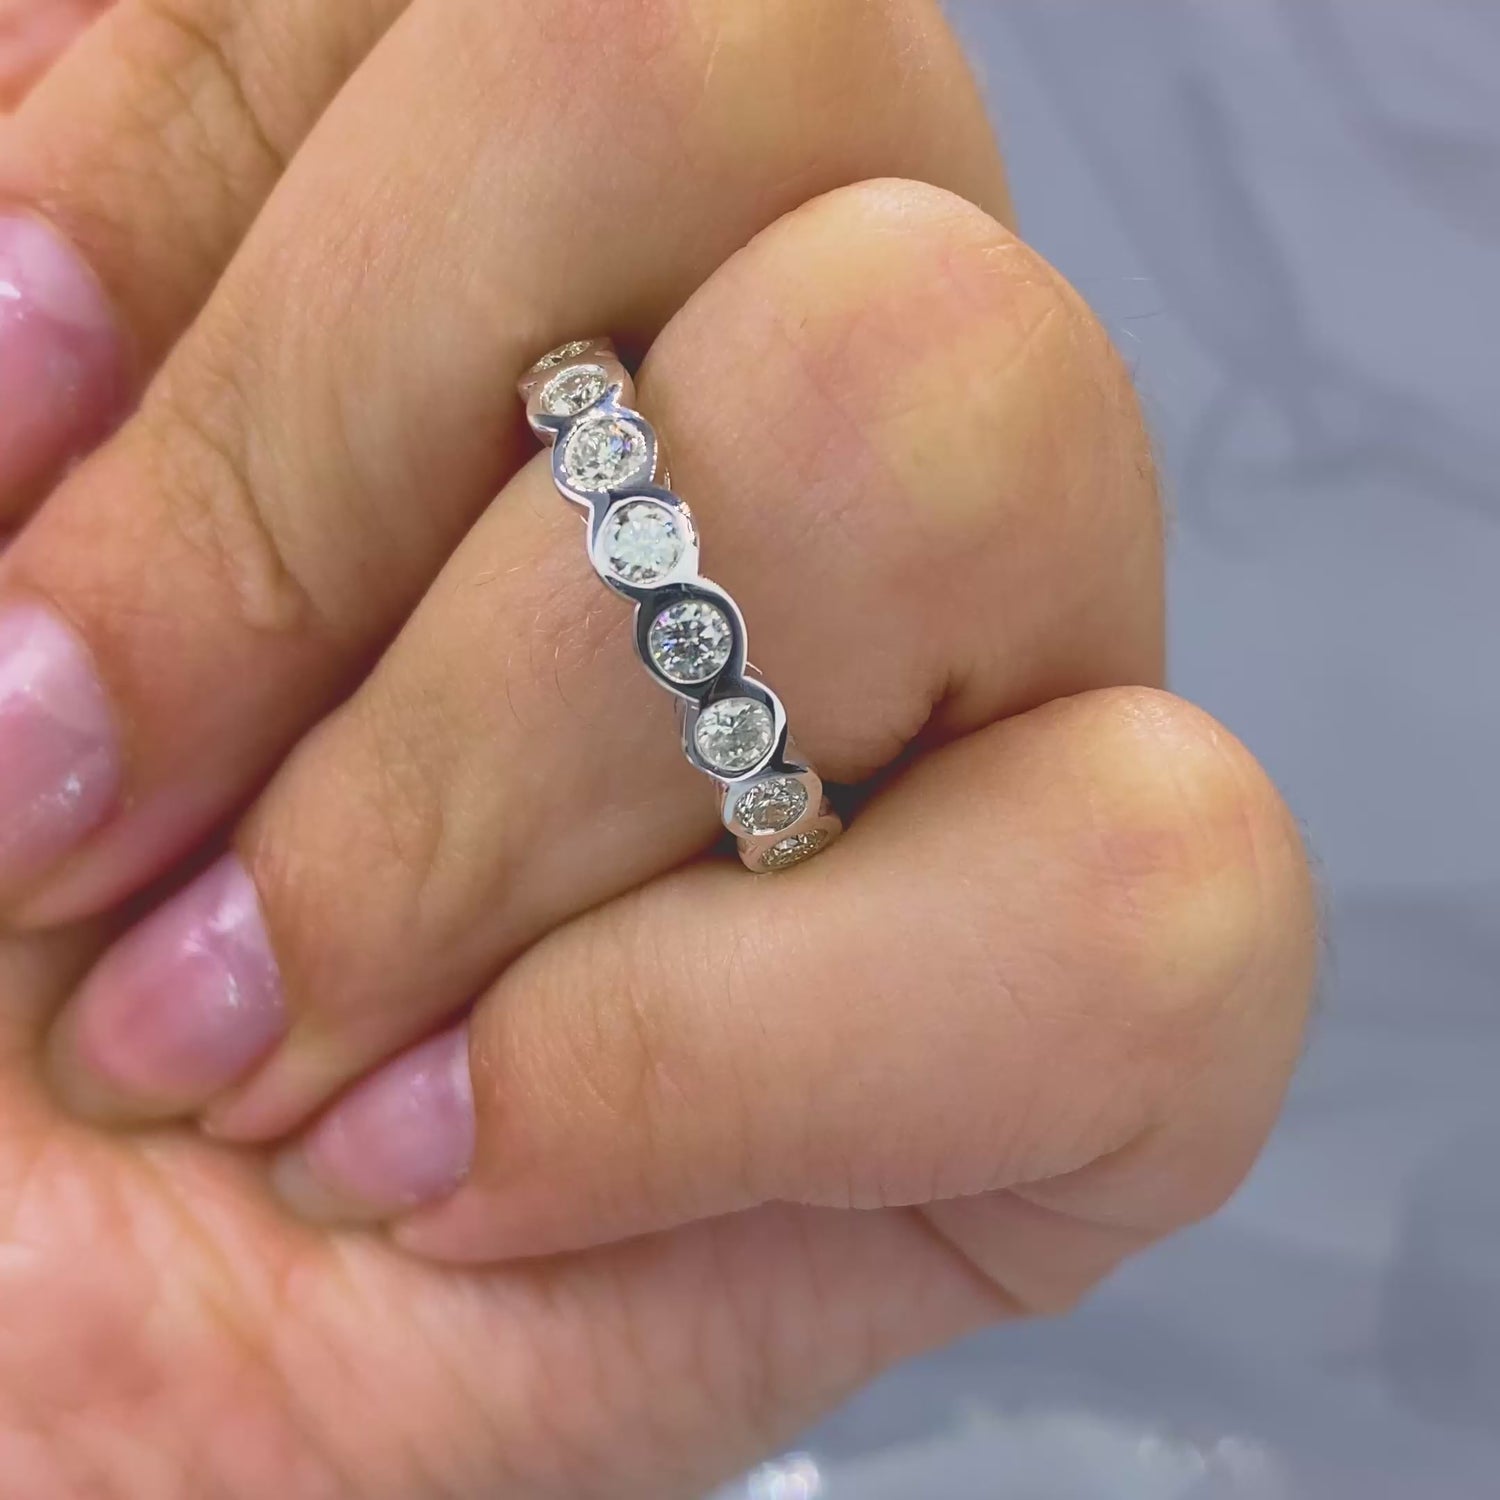 Delightful 1.50 CT Round Cut Diamond Eternity Ring in 14KT White Gold